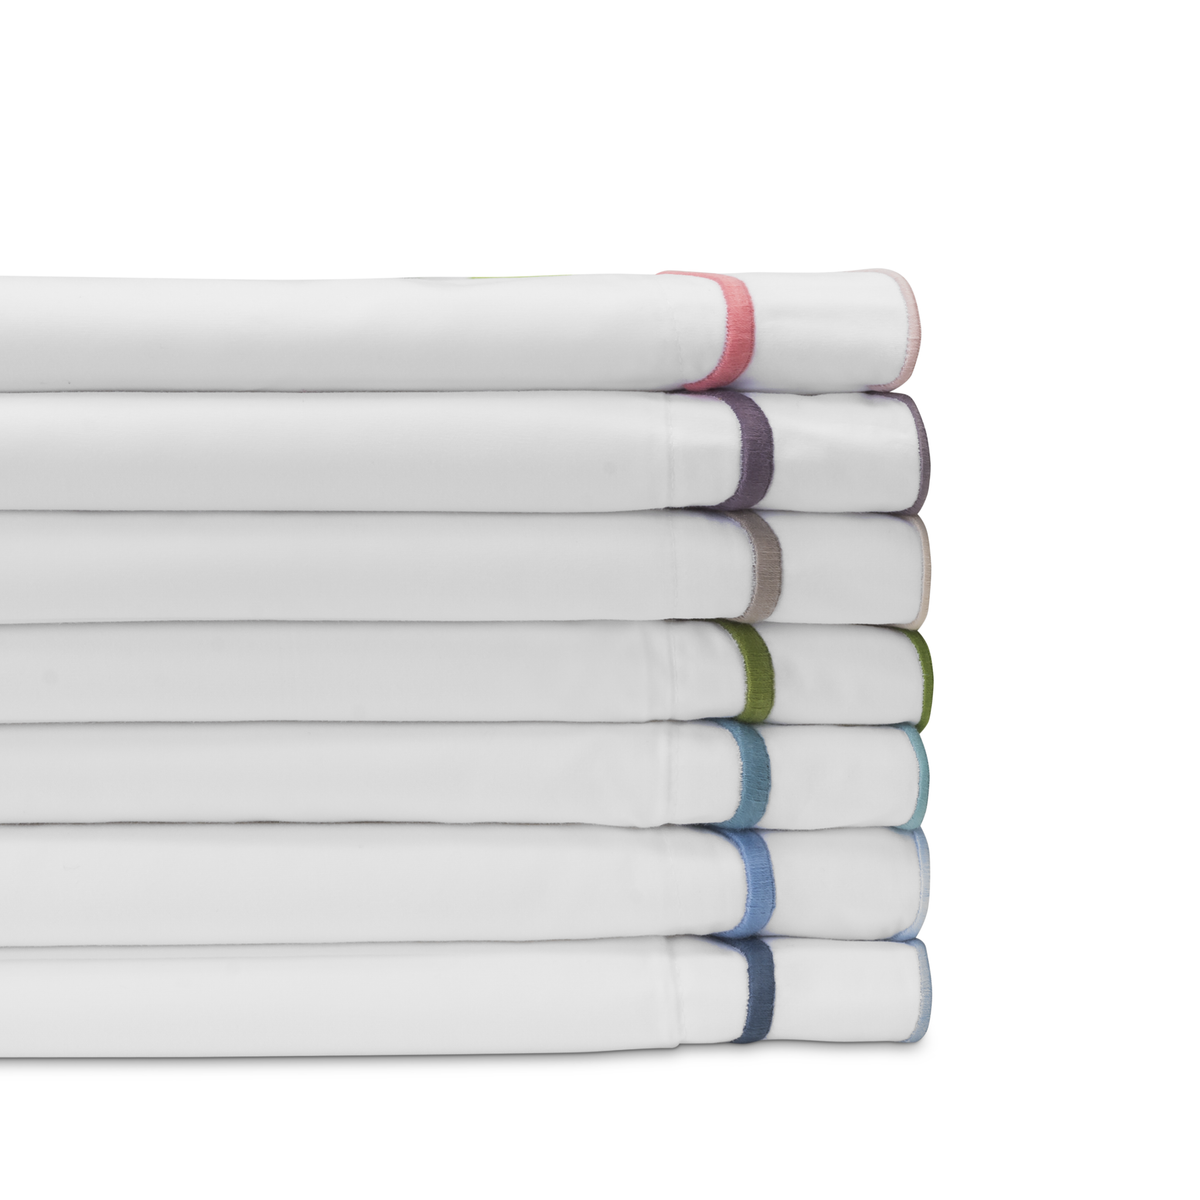 Matouk India Bedding Multicolors Folded and Stacked Sheets